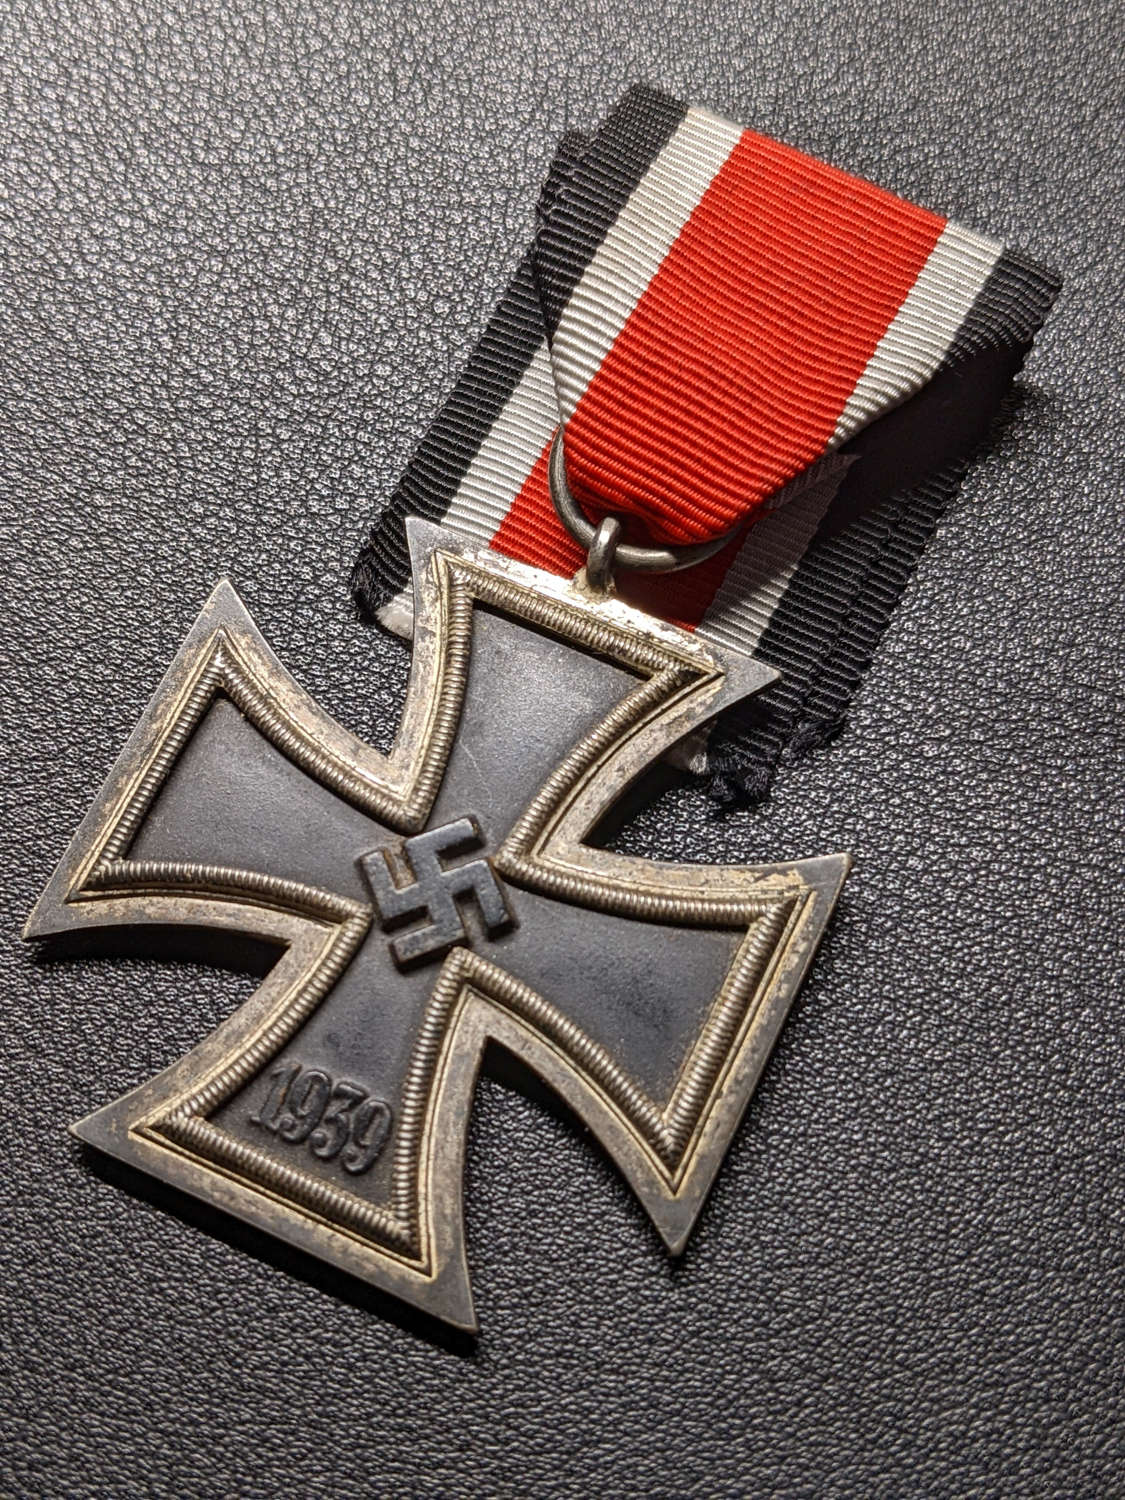 Iron Cross 2nd Class Non-maker marked with High Relief Swastika